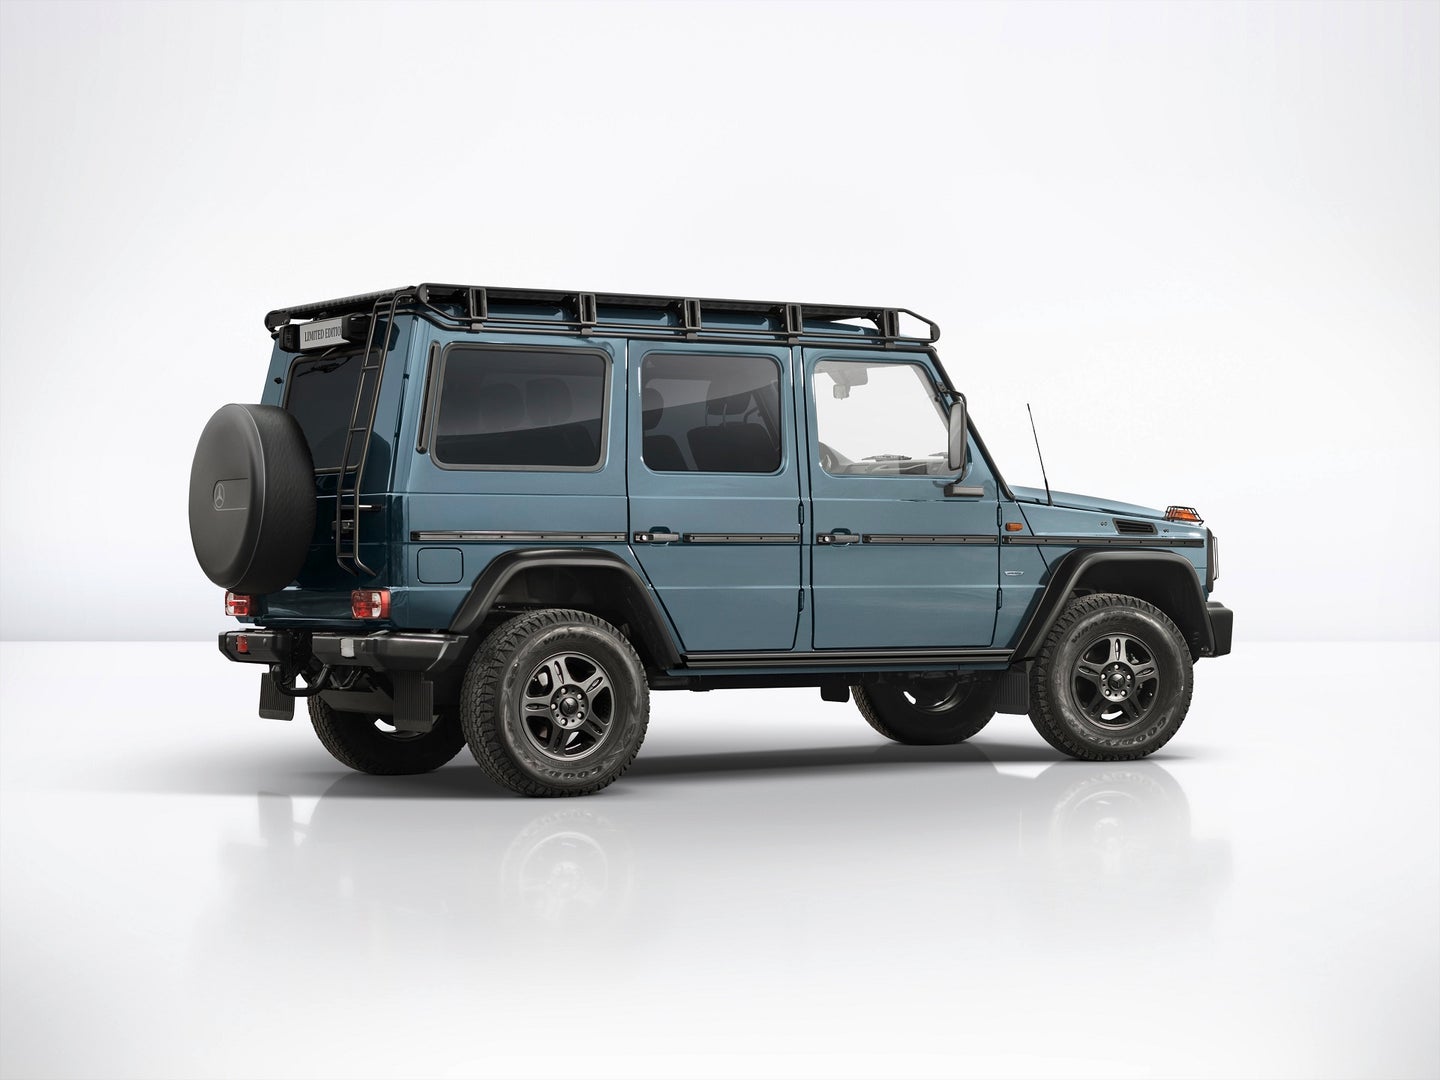 Three New Limited Edition G-Class&#8217; with Alpine Aspirations